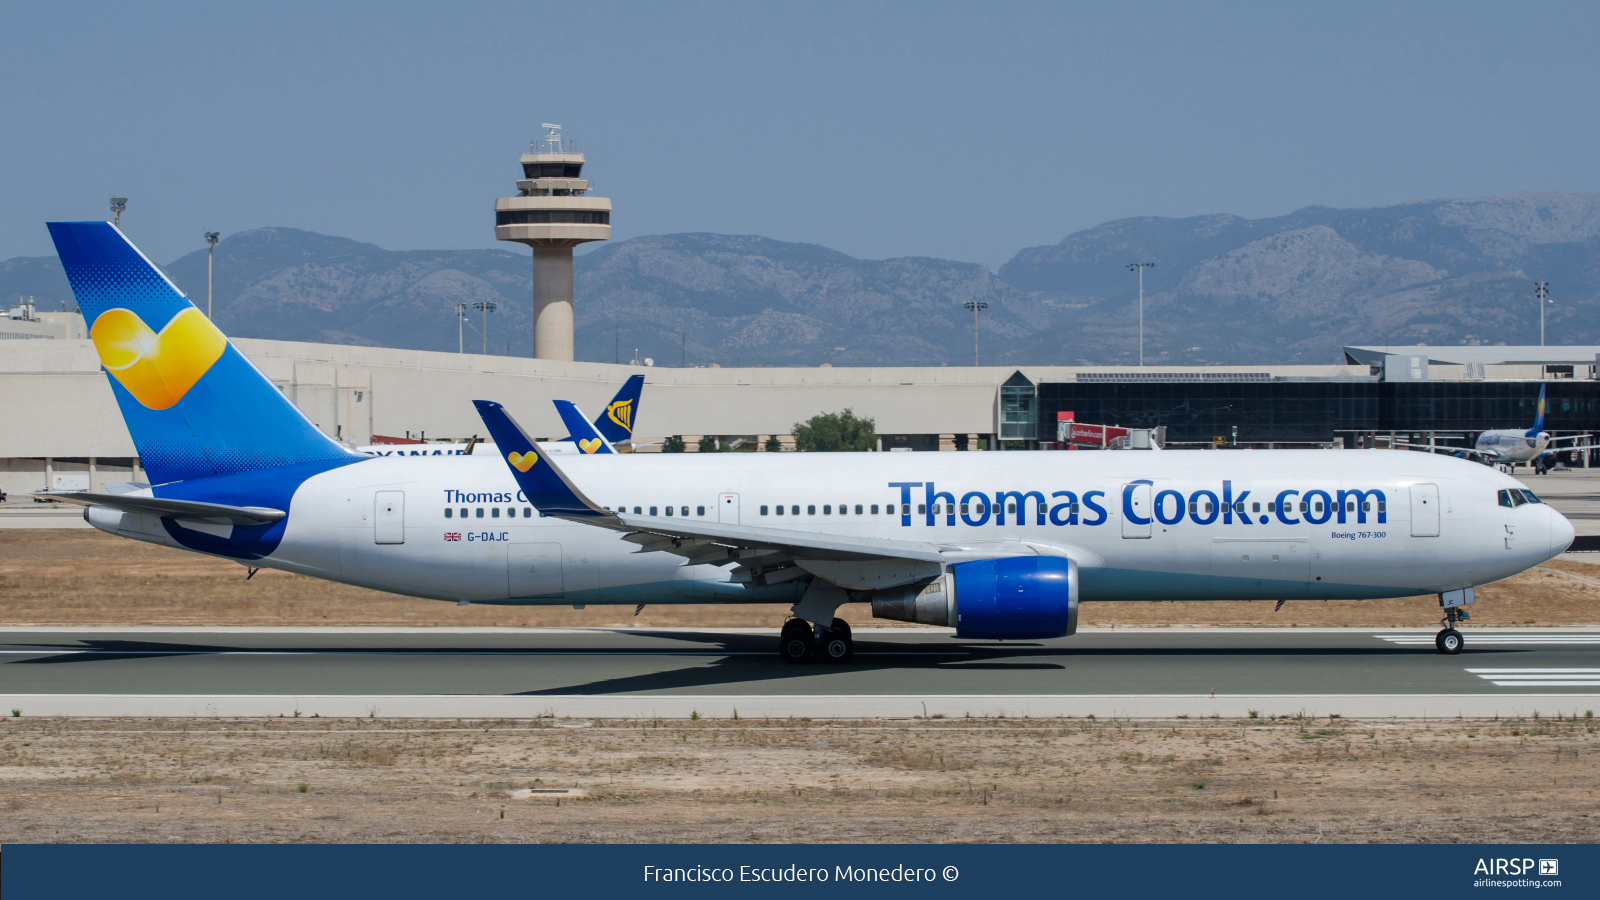 Thomas Cook Airlines  Boeing 767-300  G-DAJC